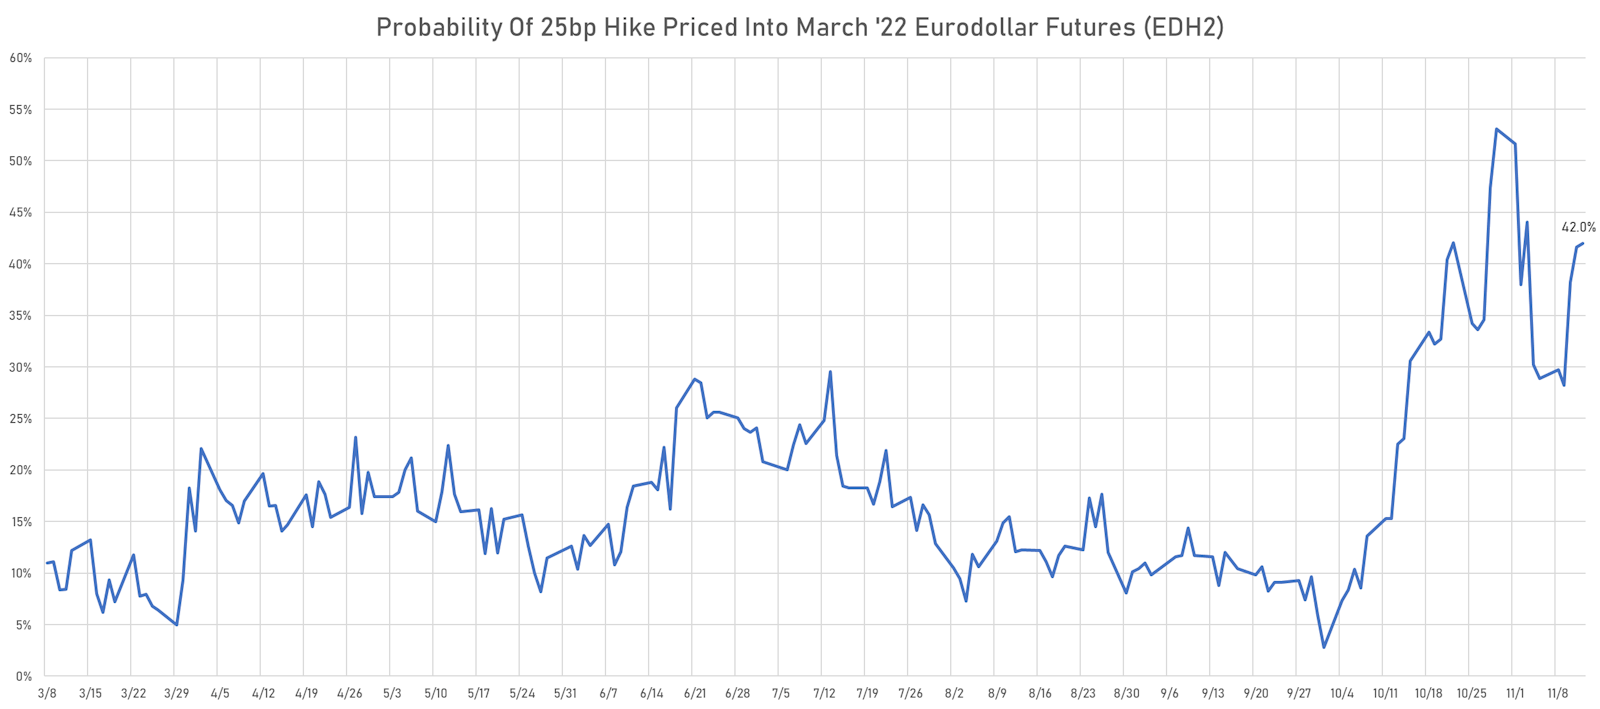 Probability of a Fed Hike Before June 2022 priced into EDH2 futures | Sources: ϕpost, Refinitiv data 